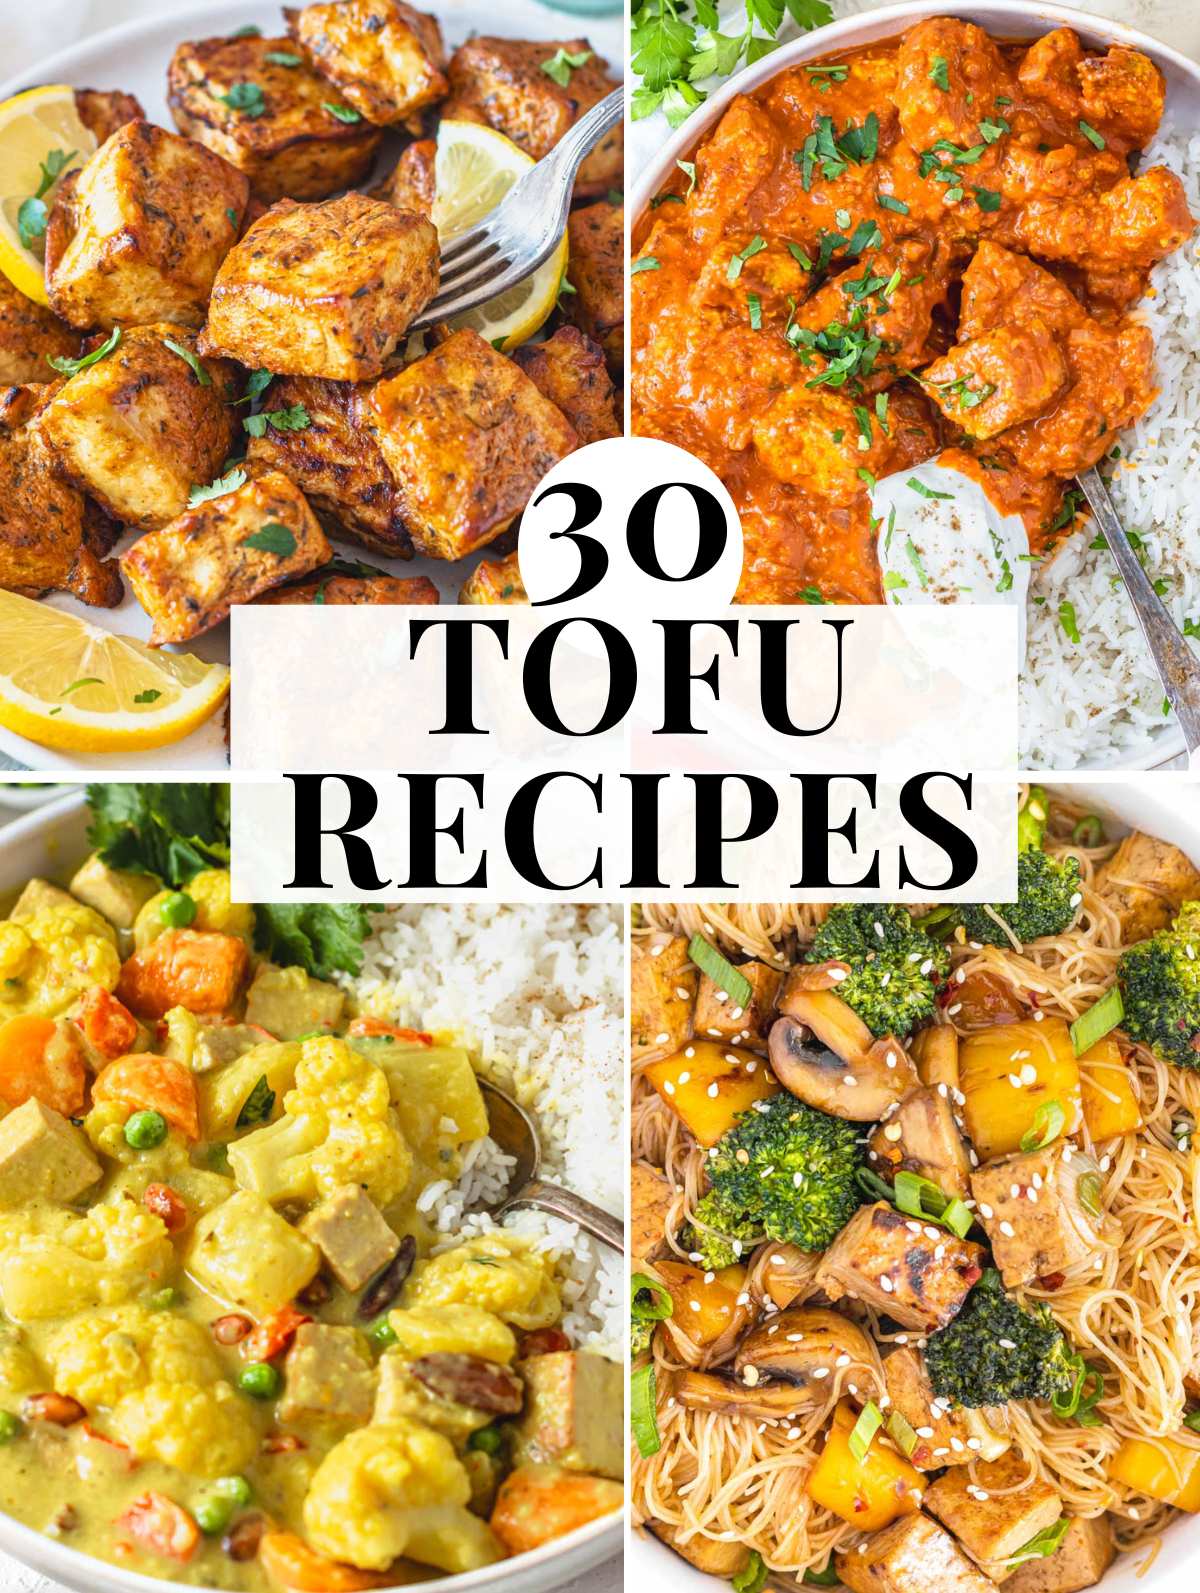 Easy tofu recipes with curries, stir fries and soups